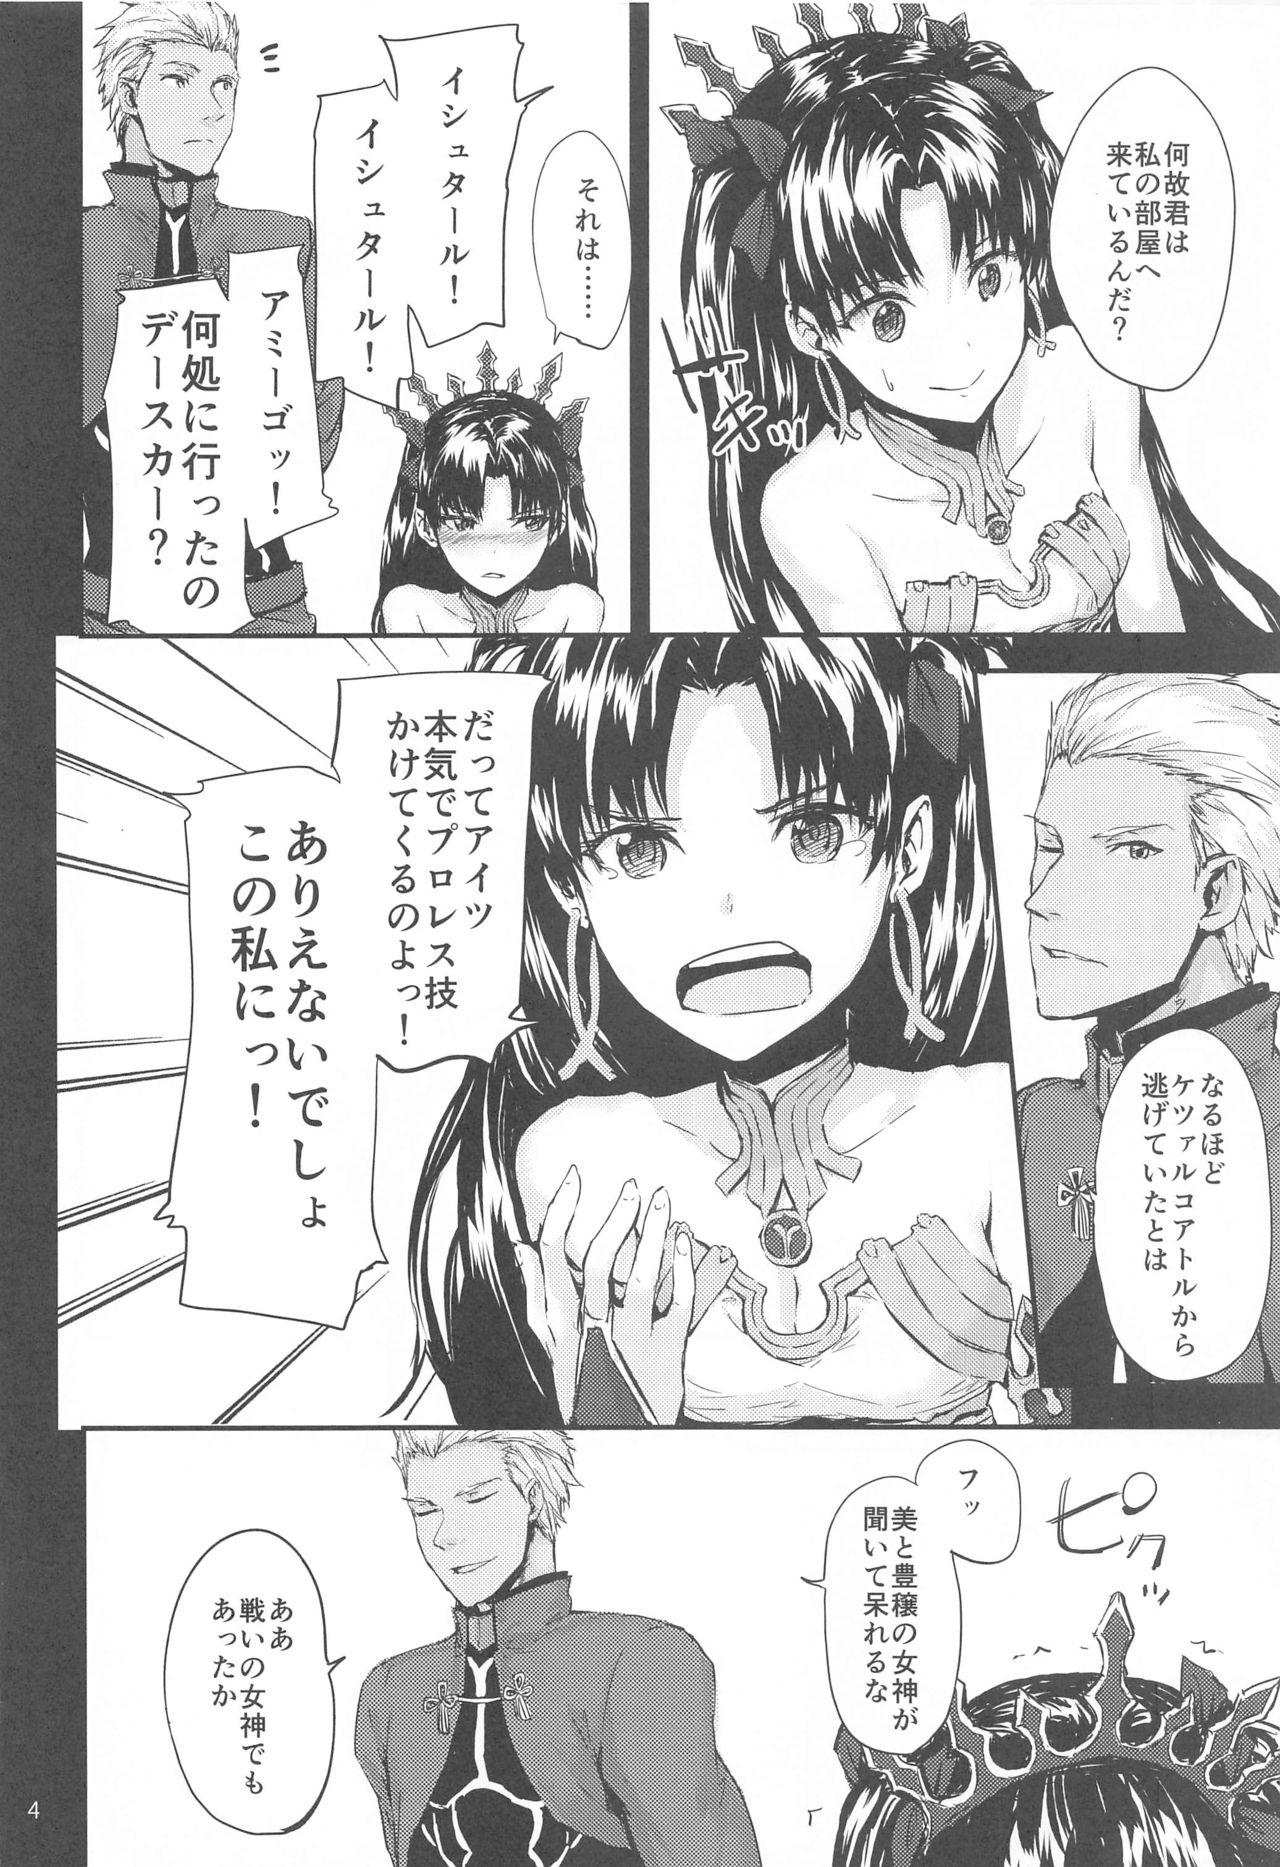 Curvy Sextet Girls 4 - Fate grand order Granblue fantasy Free Hardcore - Page 5